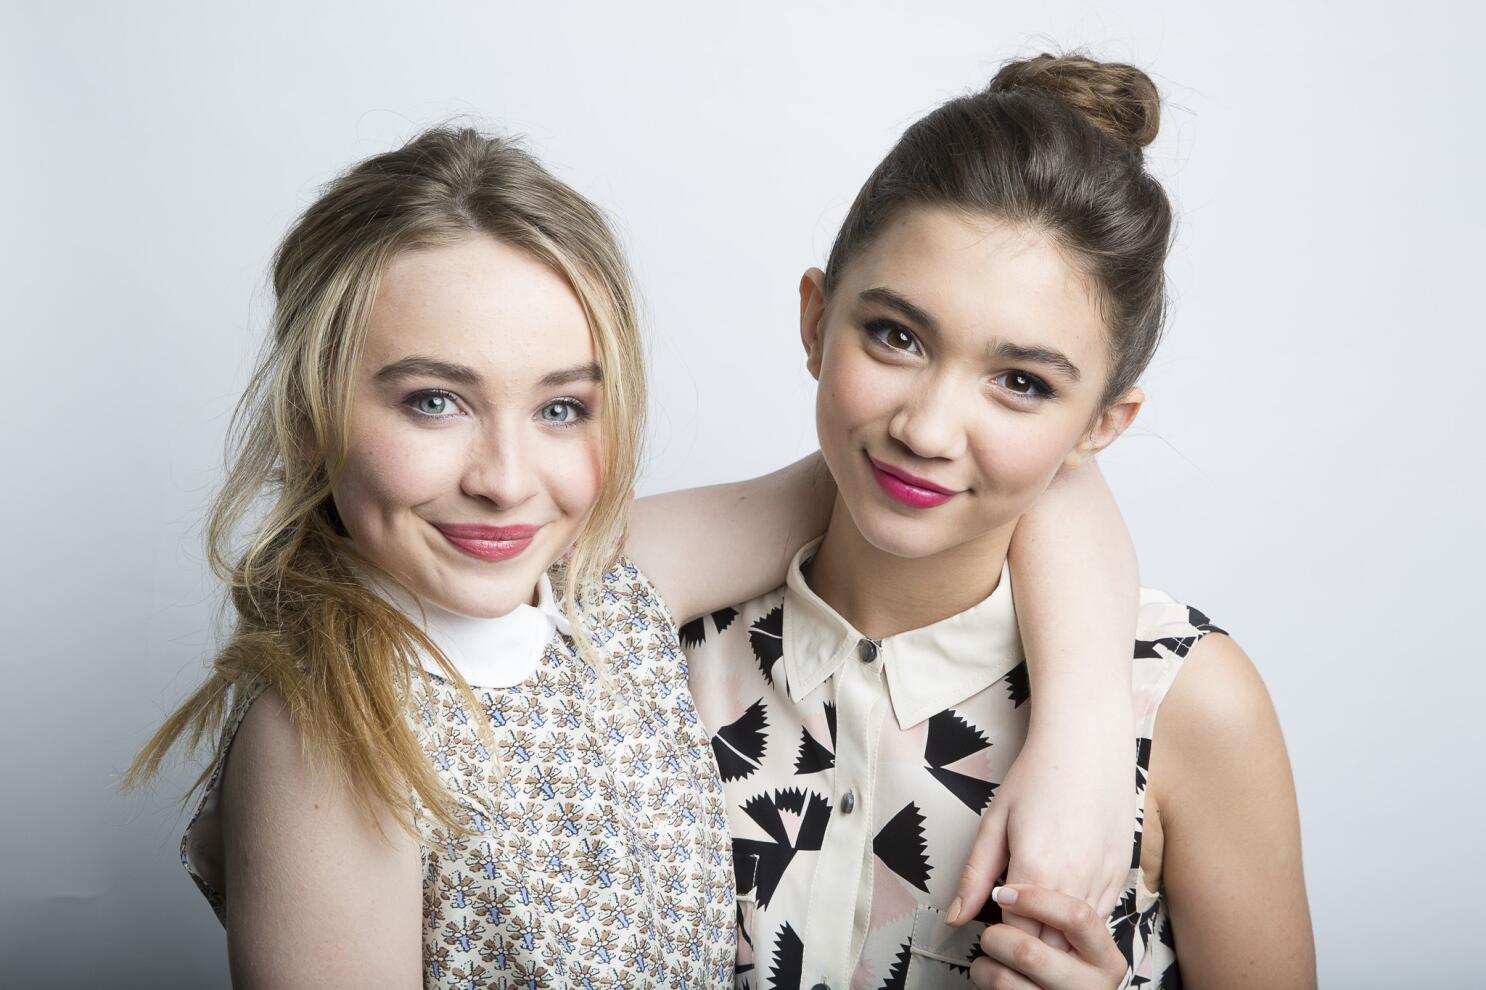 Girl Meets World' clothing for tweens launches at Kohl's - Los